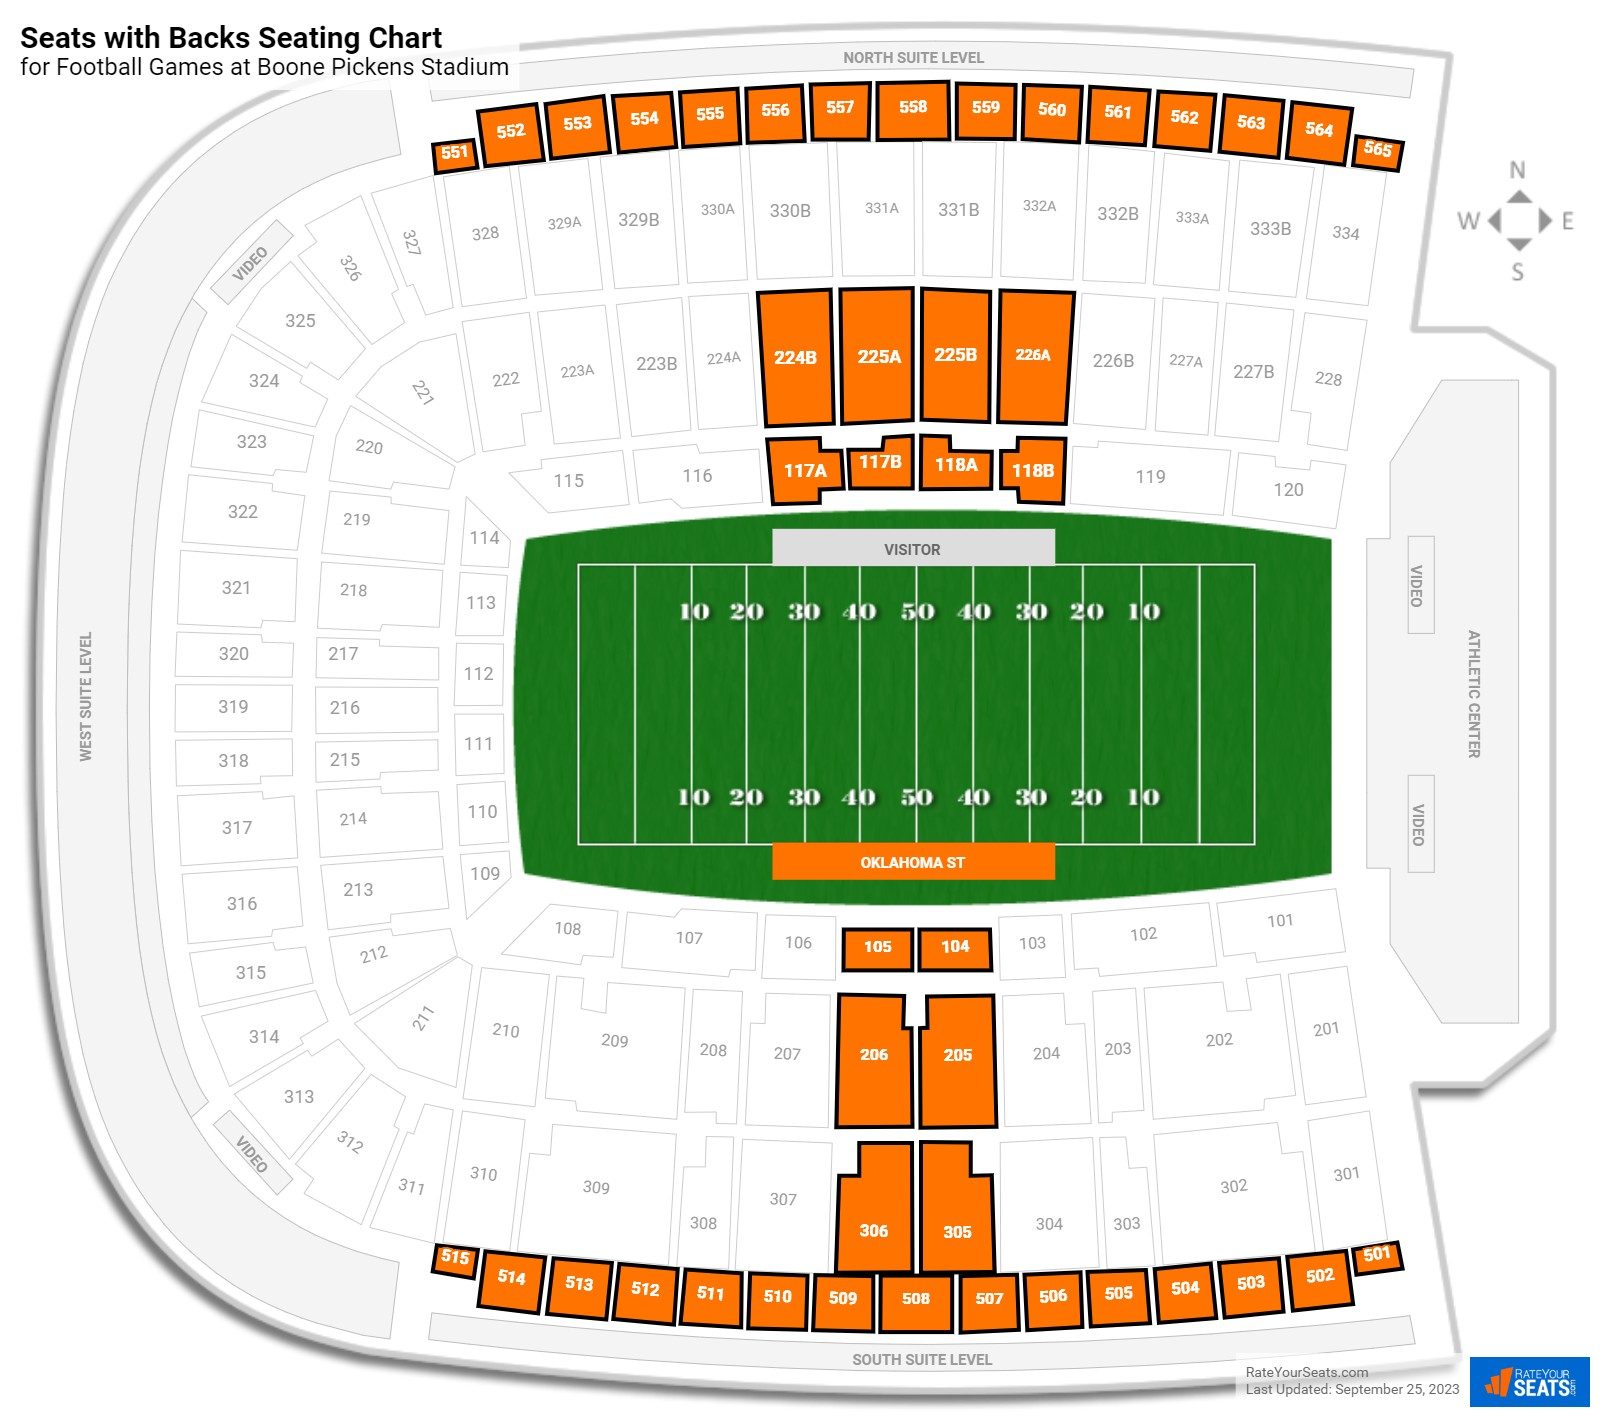 Football Seats with Backs Seating Chart at Boone Pickens Stadium